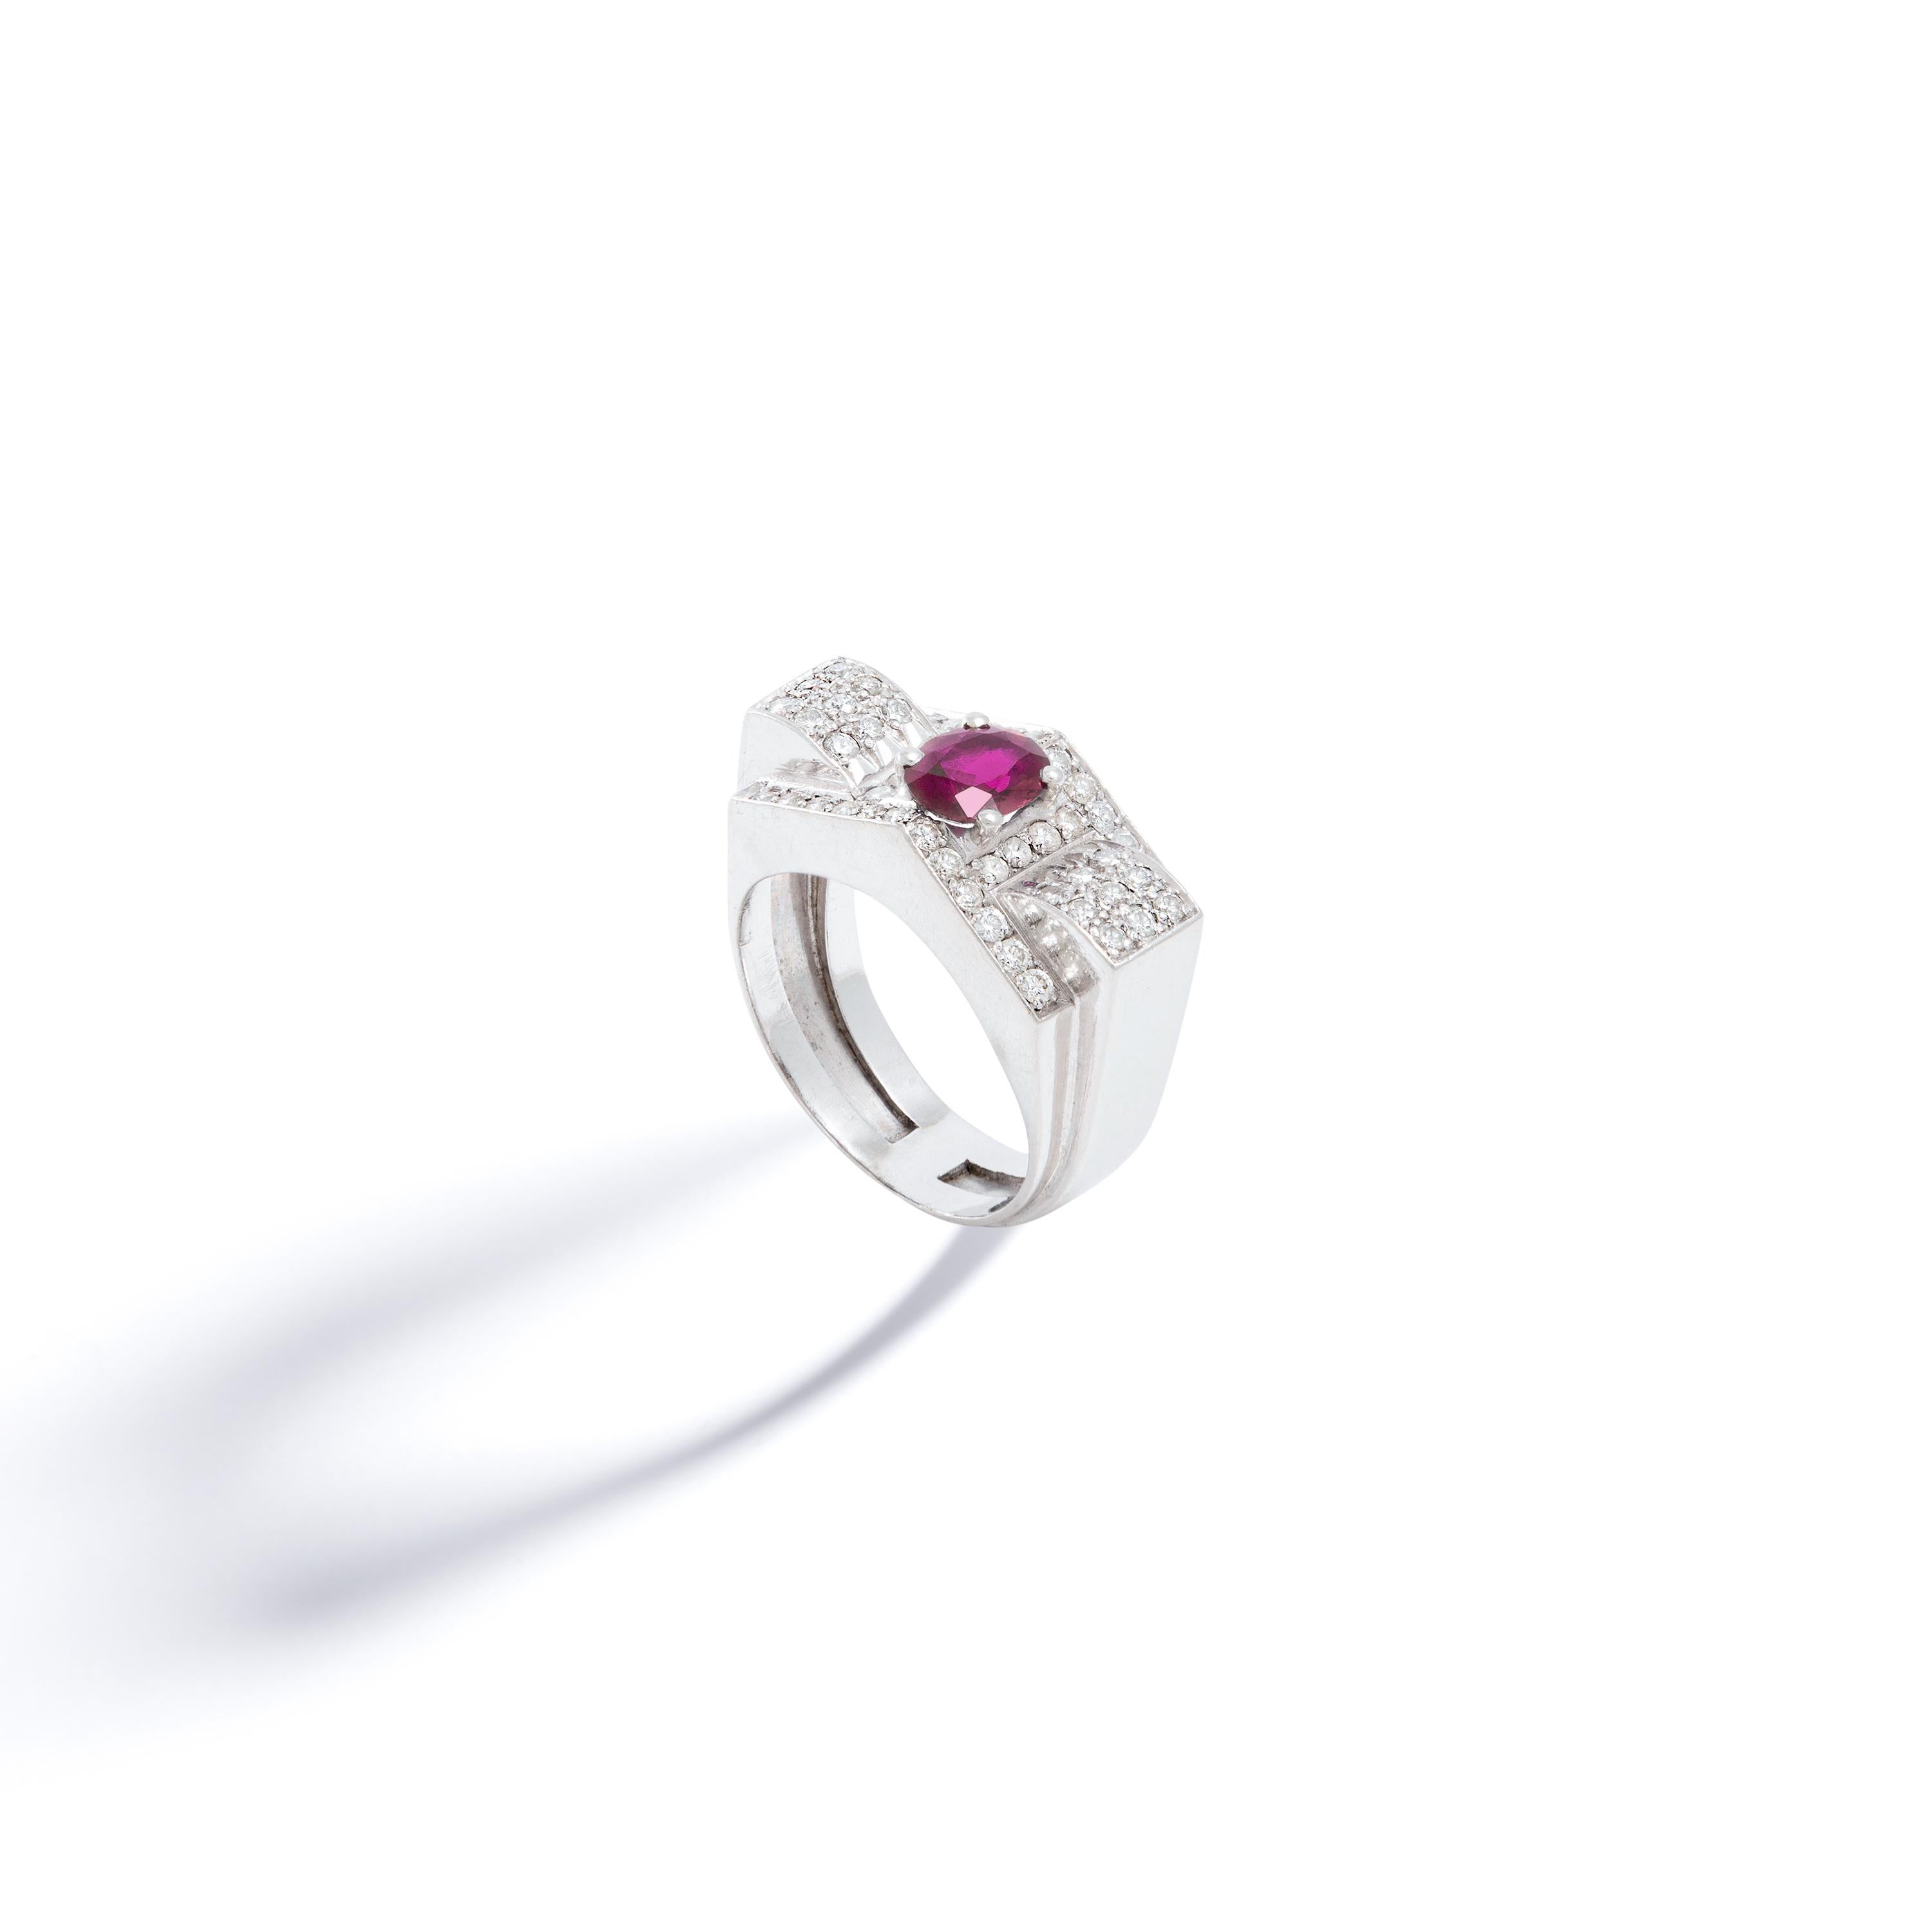 This exquisite chevaliere ring showcases a typical Art Deco design and is crafted in platinum. The centerpiece of the ring is a stunning 1.20 carat natural ruby, which is surrounded by sparkling diamonds.

The combination of the vibrant ruby and the